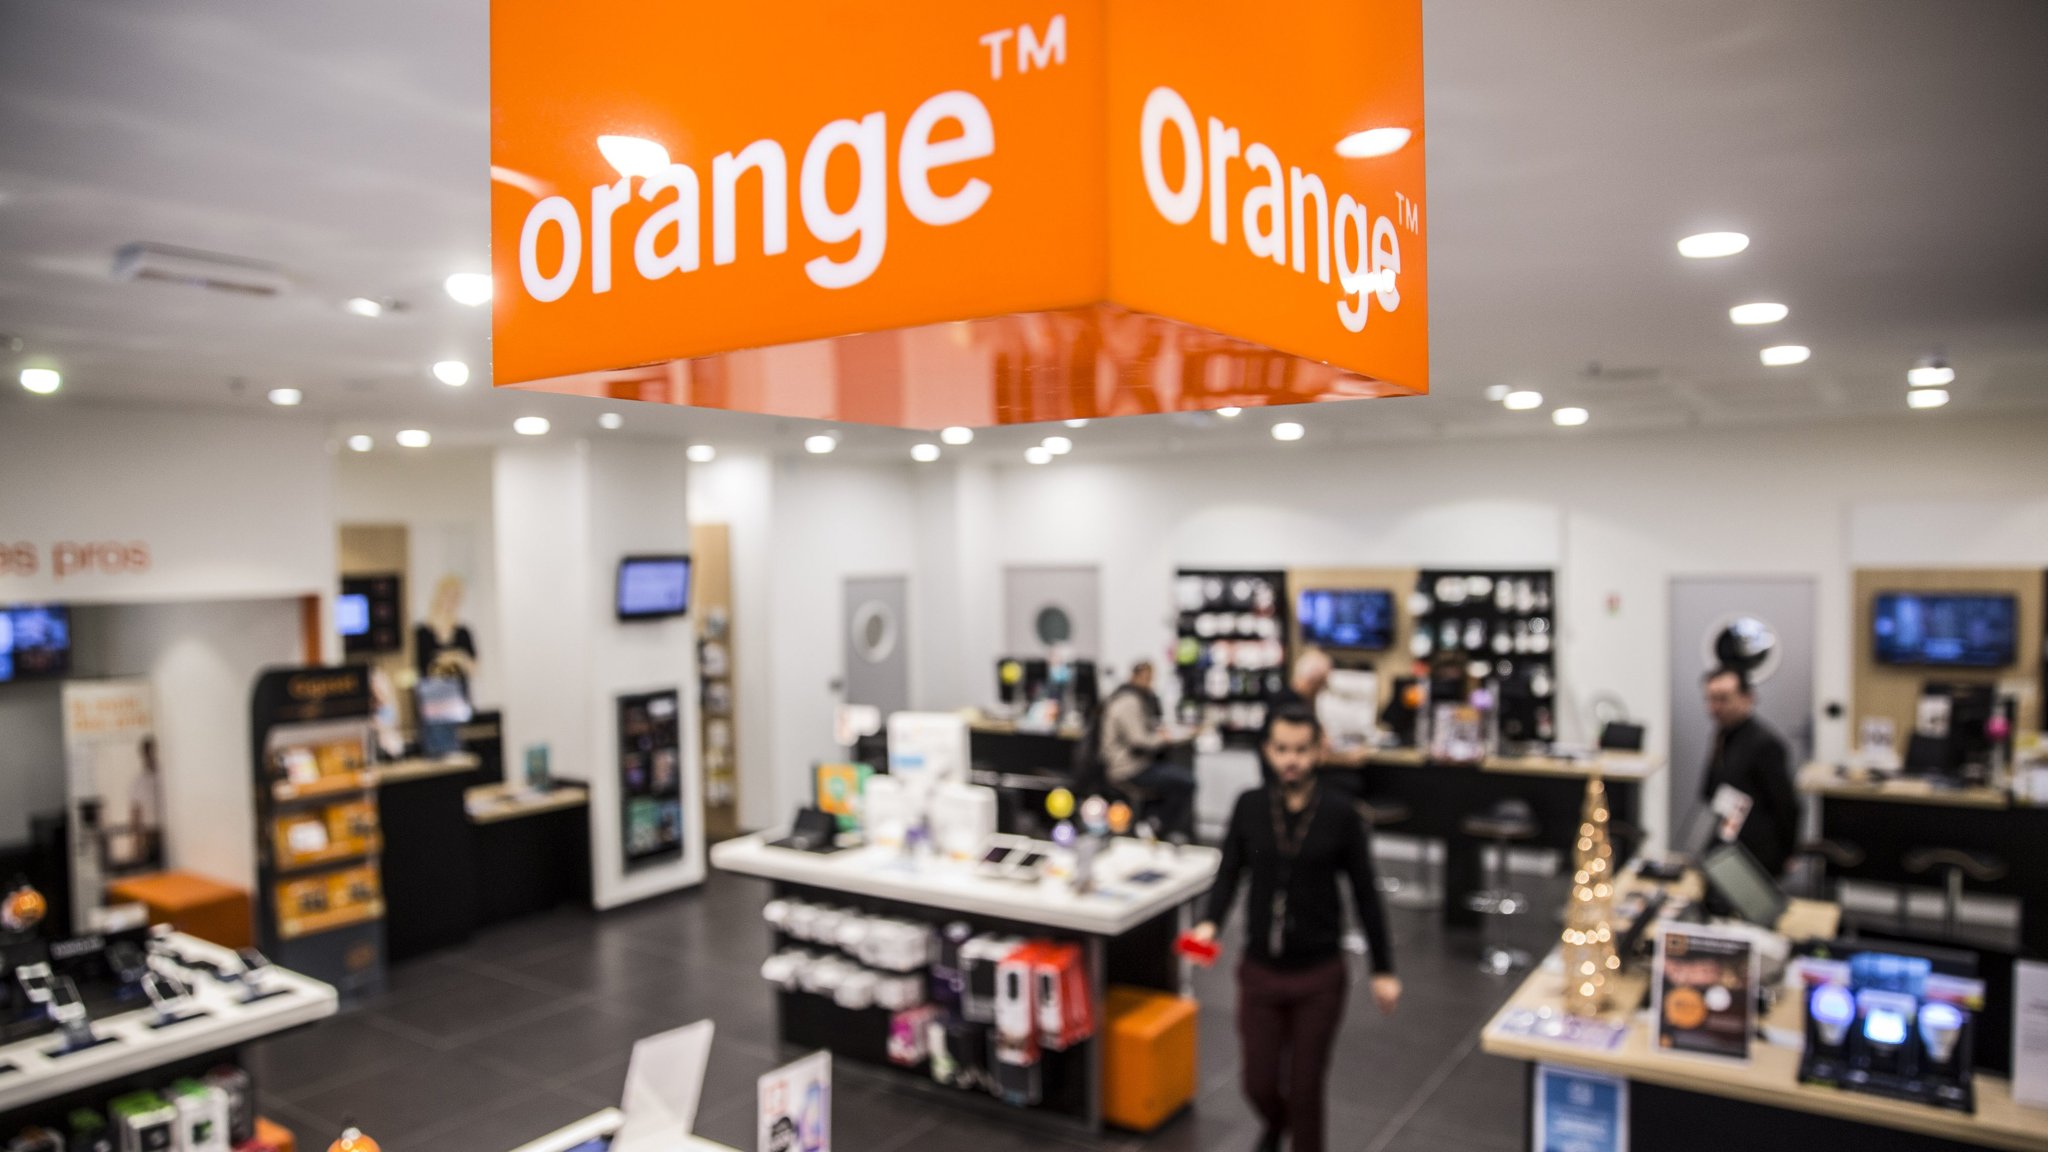 While Europe is behind on 5G SA, Orange has launched it in Spain